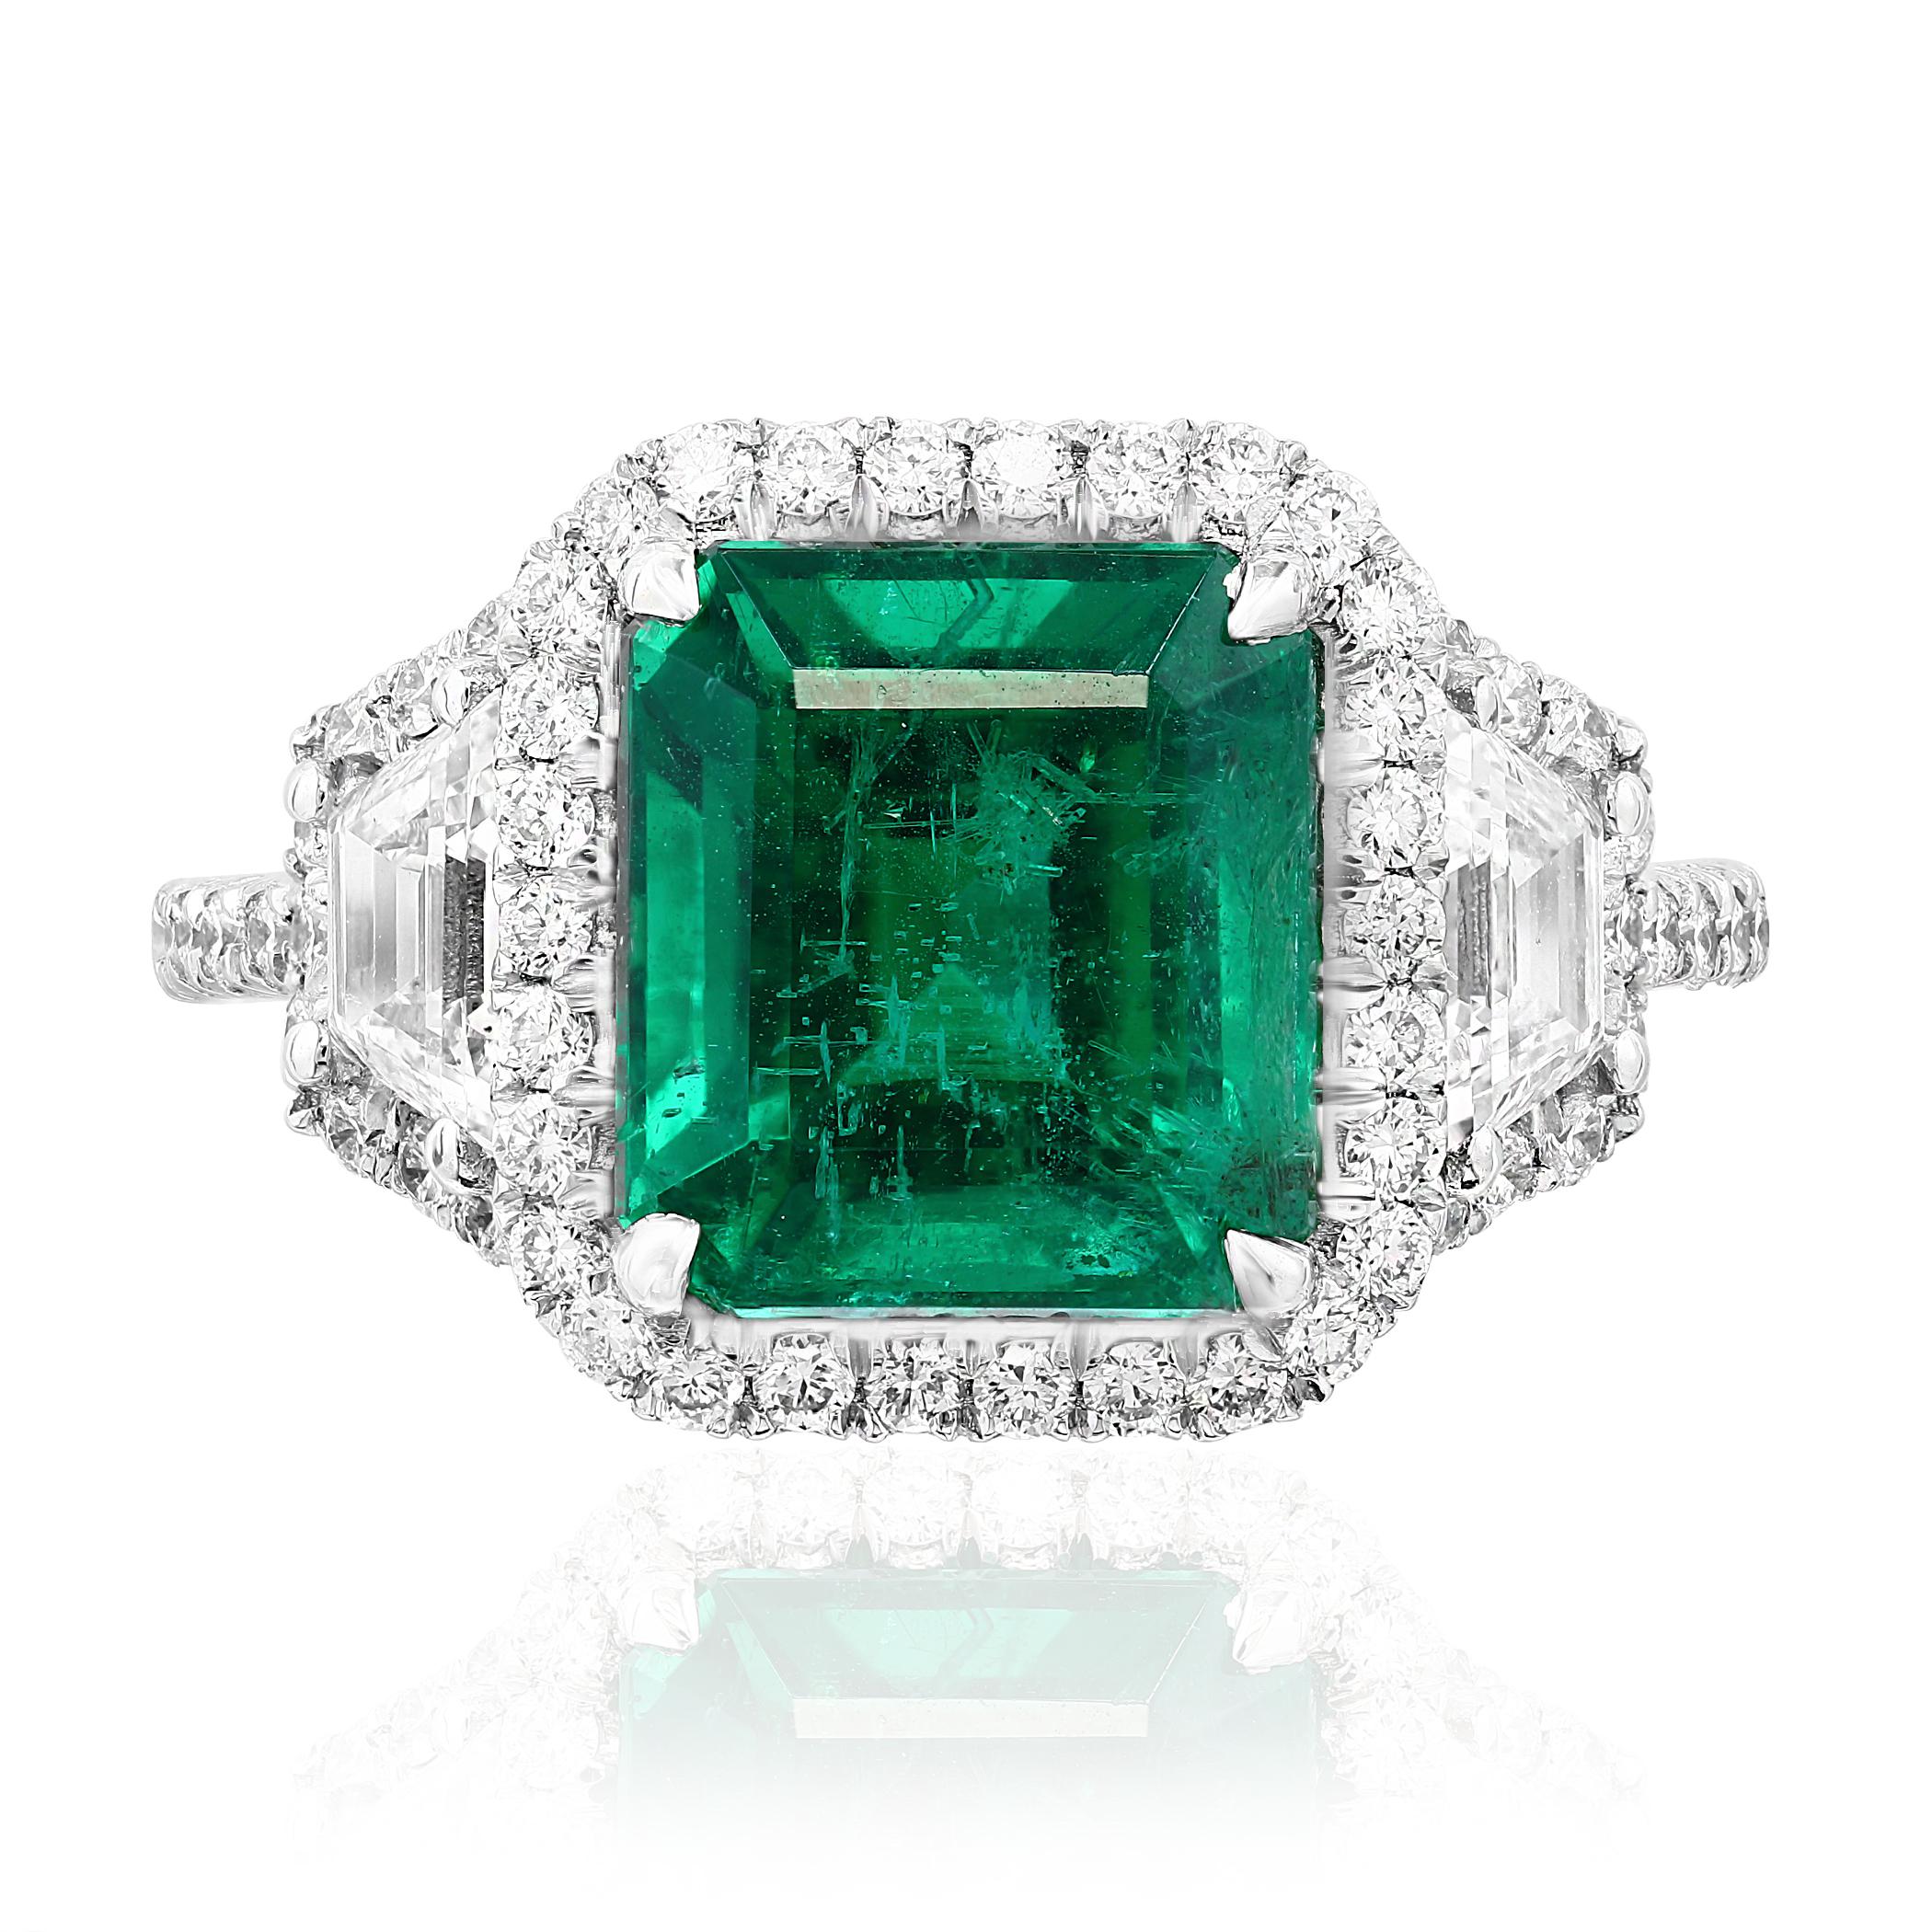 A stunning ring showcasing a rich green emerald cut emerald weighing 3.93 carats surrounded by a row of diamonds. Flanking the center stone are two brilliant cut trapezoid diamonds, weighing 0.71 carats total, framed in a brilliant diamond halo. 58